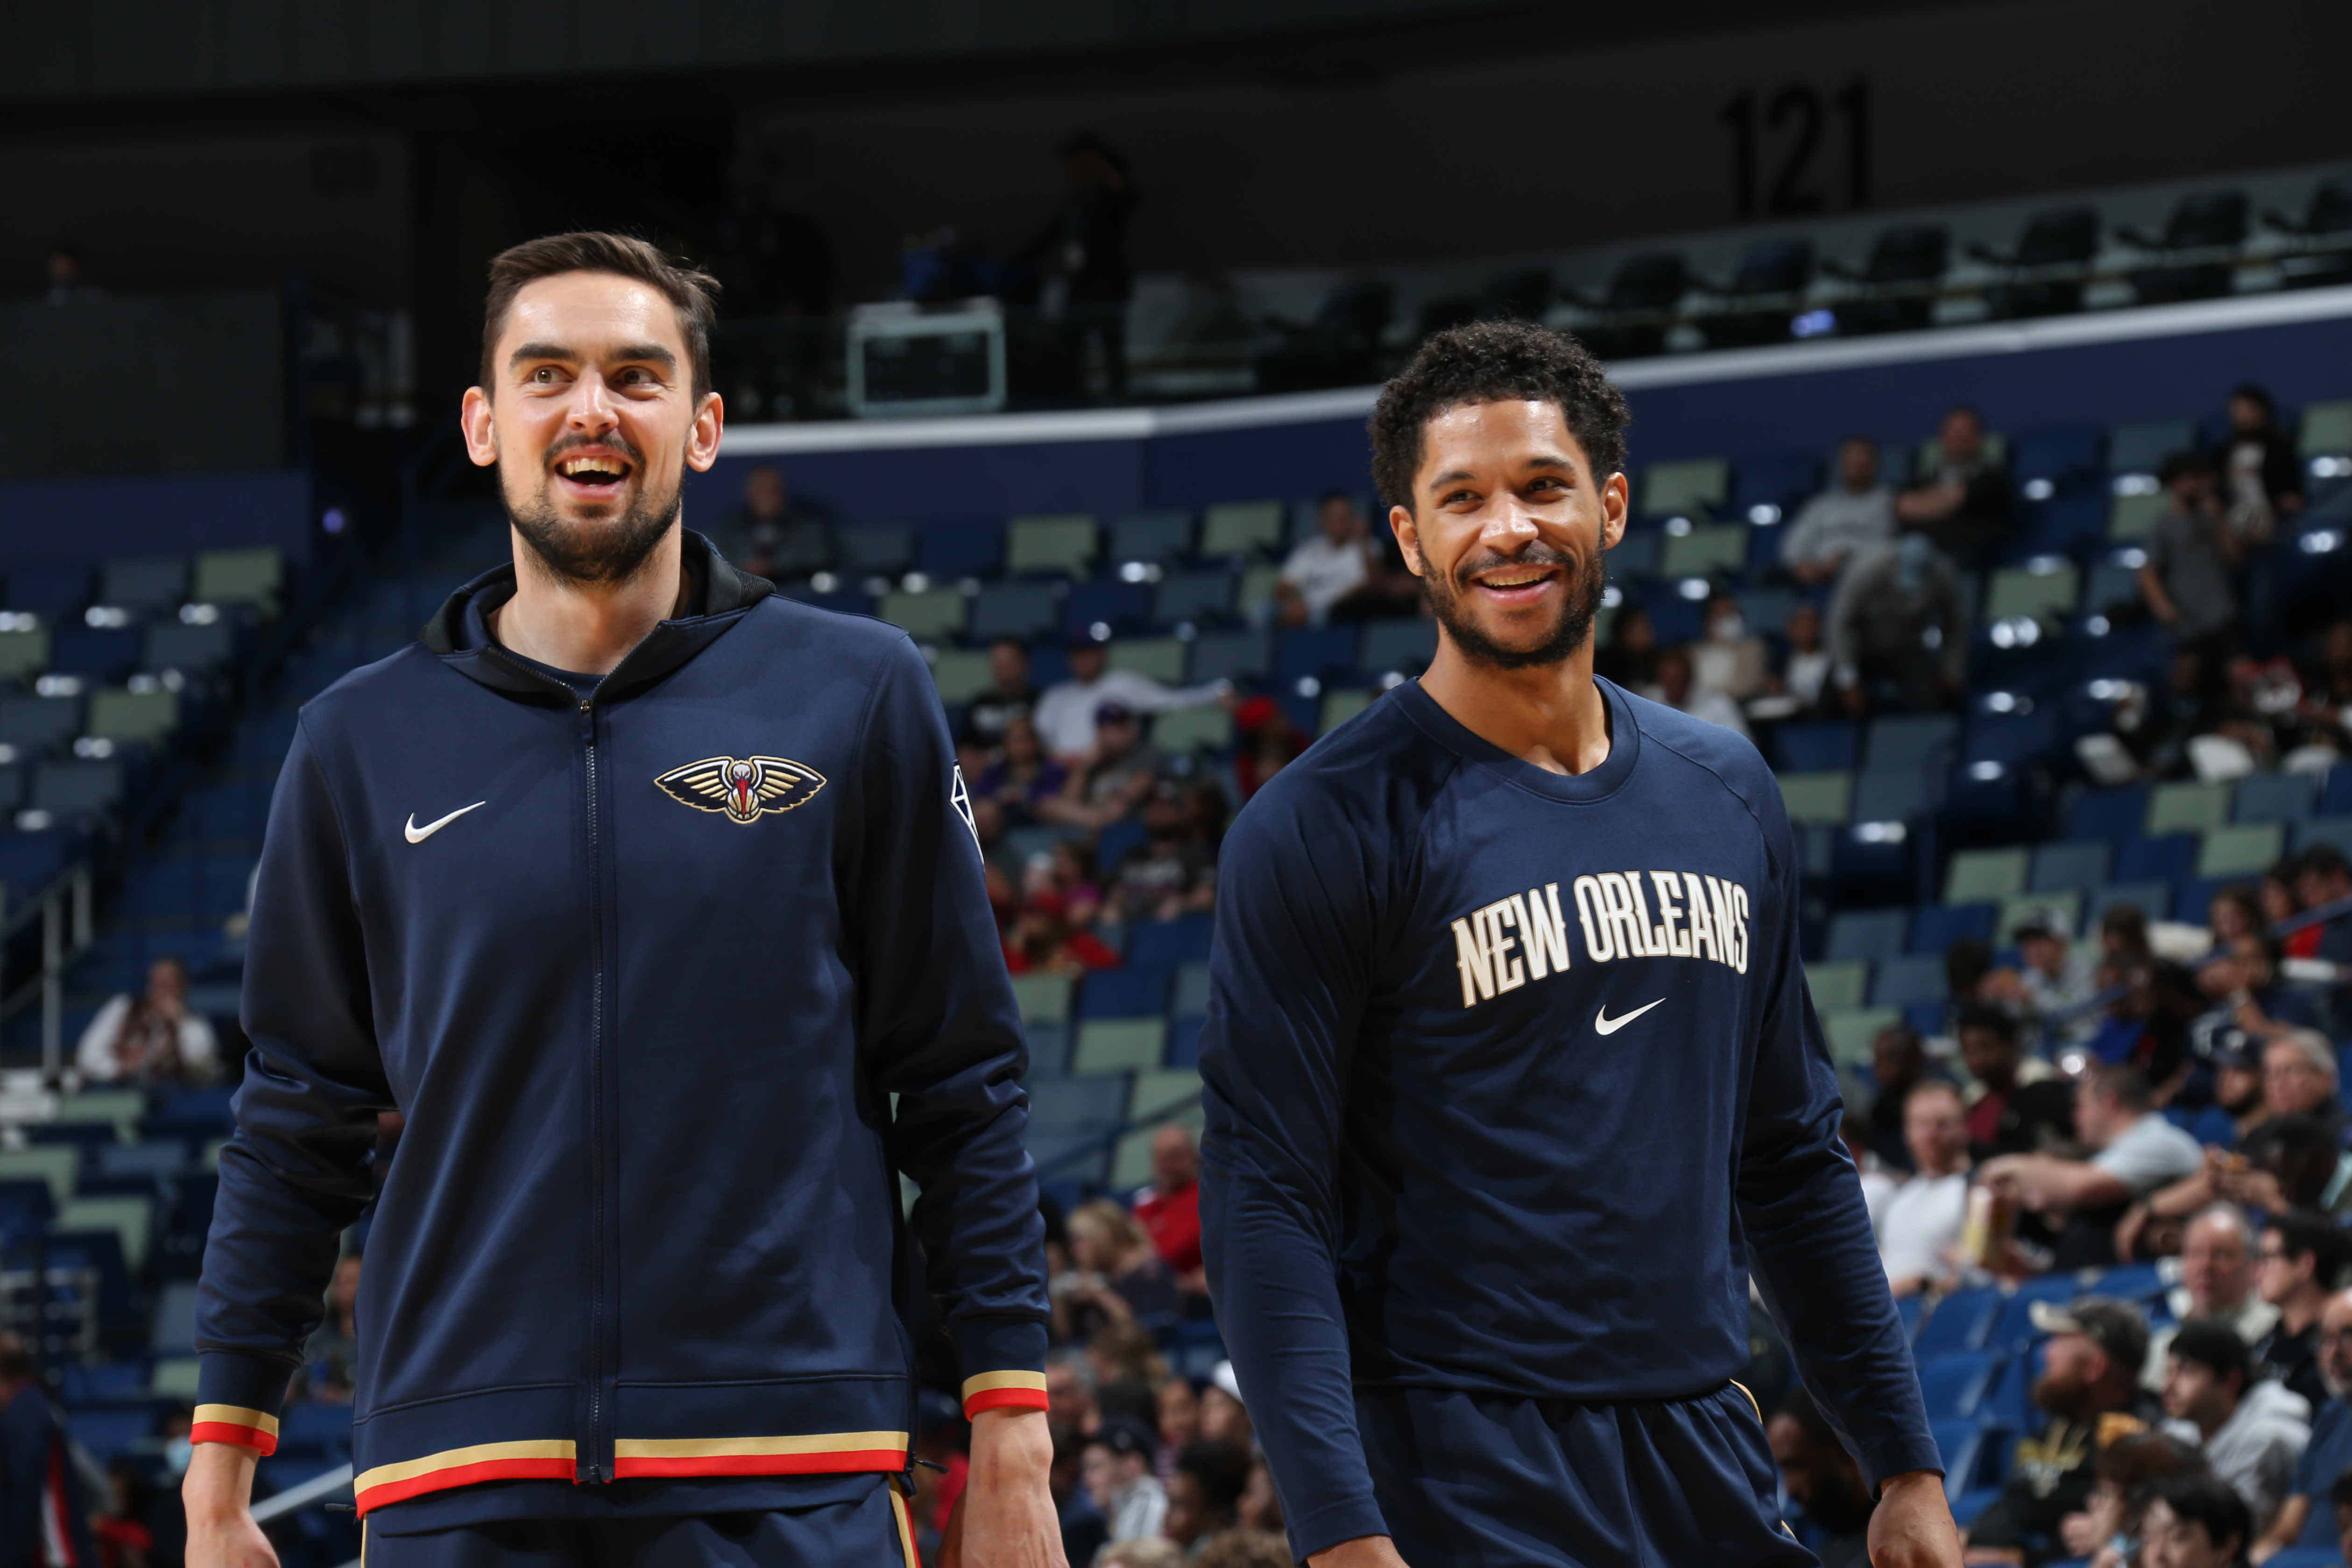 Washington Wizards v New Orleans Pelicans